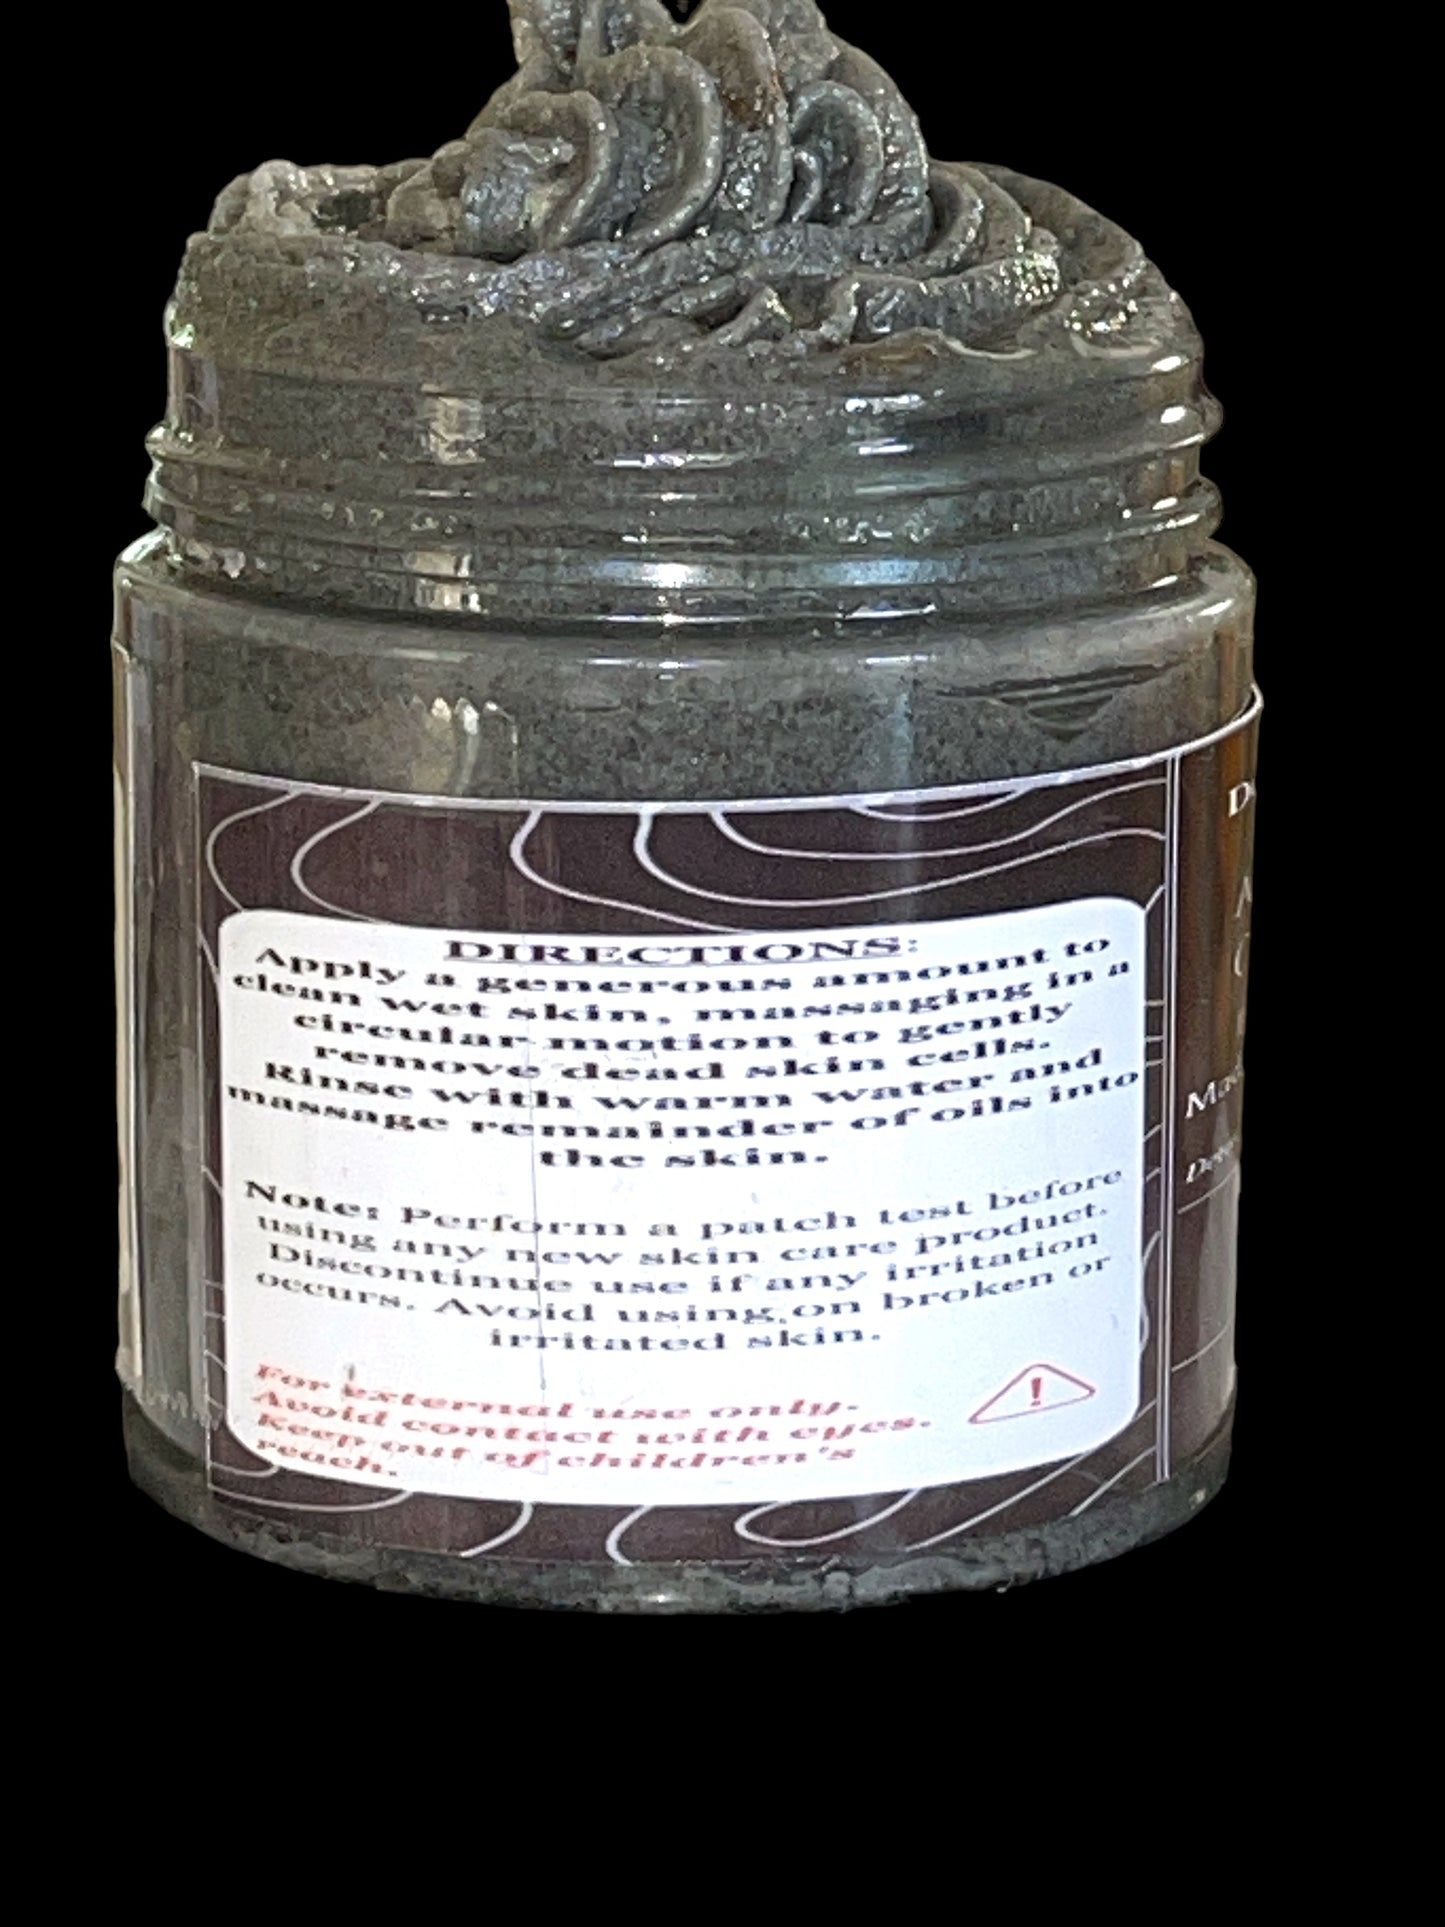 ACTIVATED CHARCOAL SCRUB - DETOX - MOISTURIZE - DEEP CLEANSE